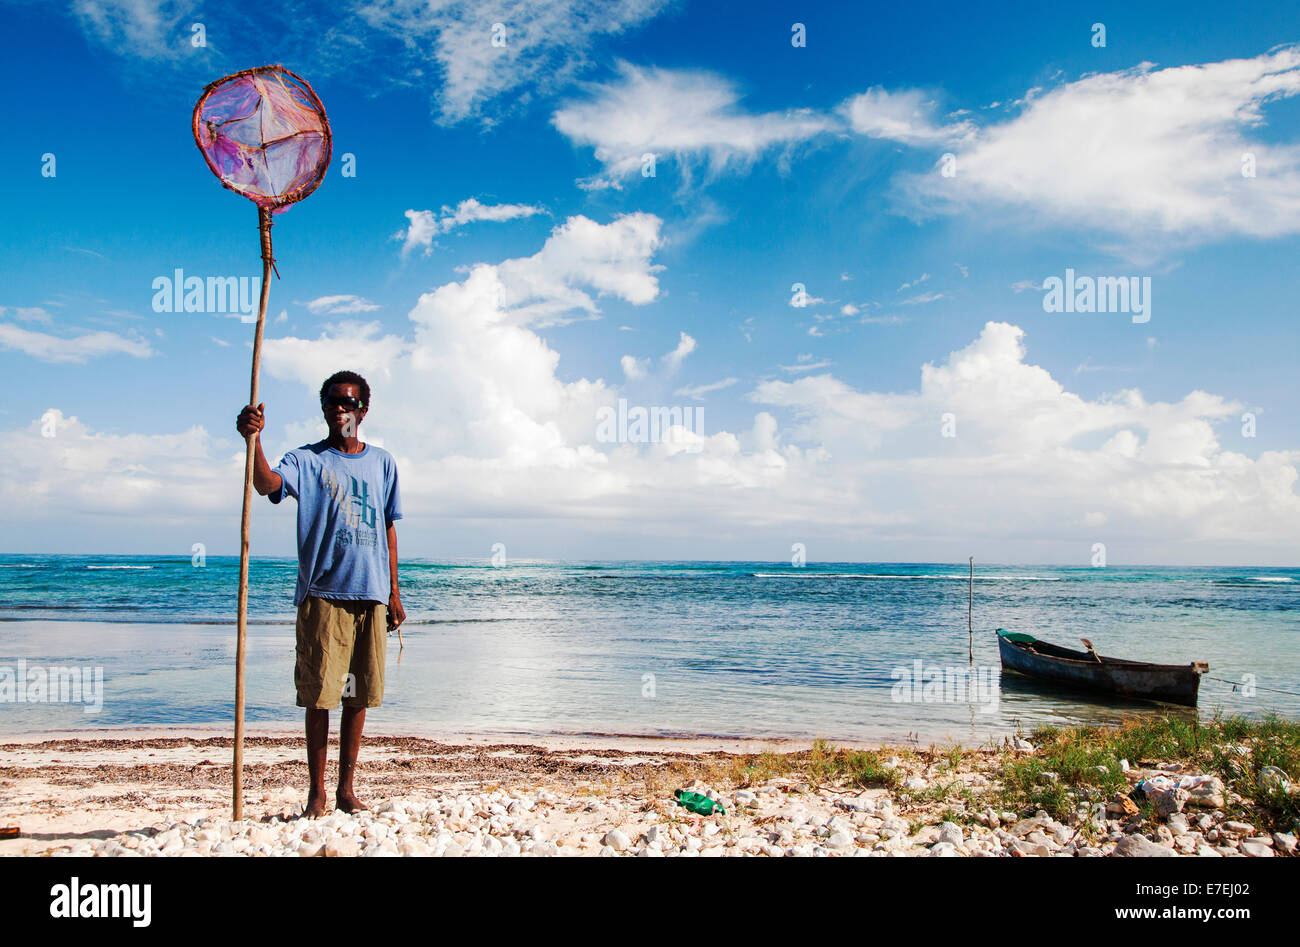 JAMAICA. A skinny man holds a handmade fishing net as he stands on